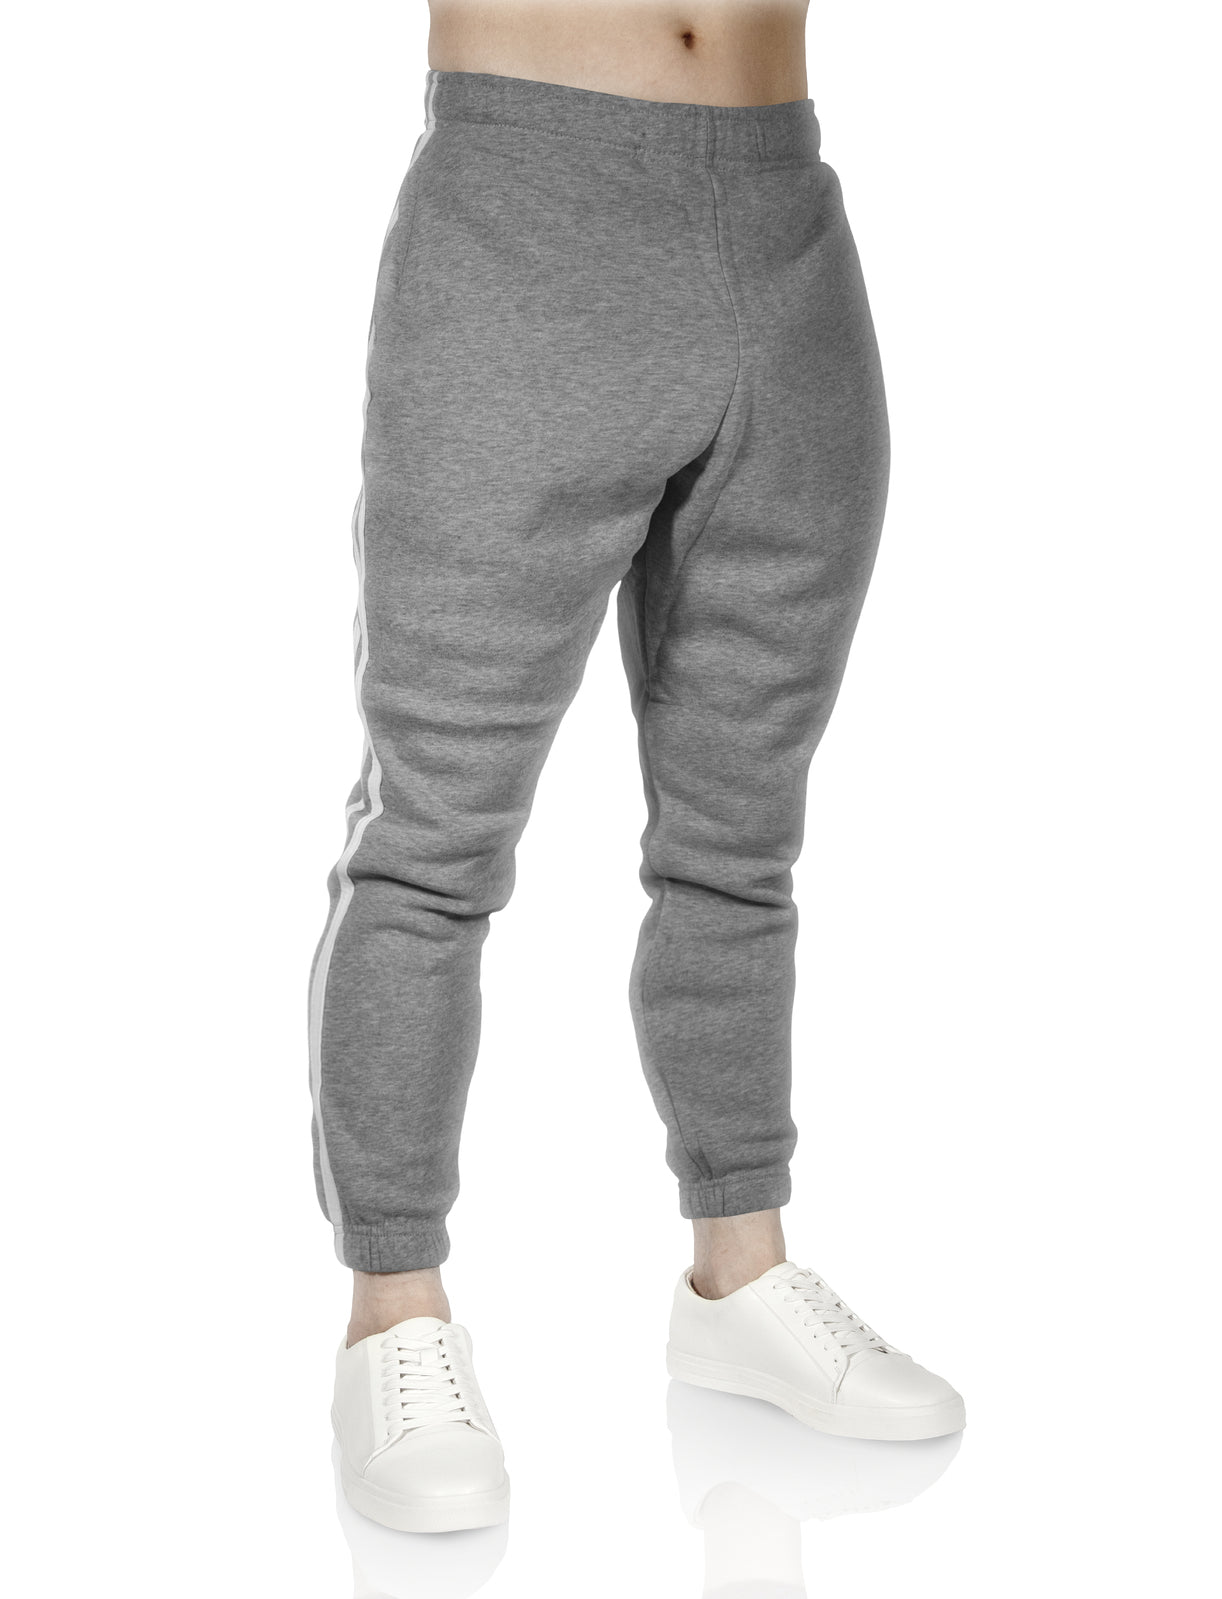 Mens Fleece Skinny Track Pants Jogger Gym Casual Sweat Trackies Warm Trousers - Grey Marle/White Stripe - S